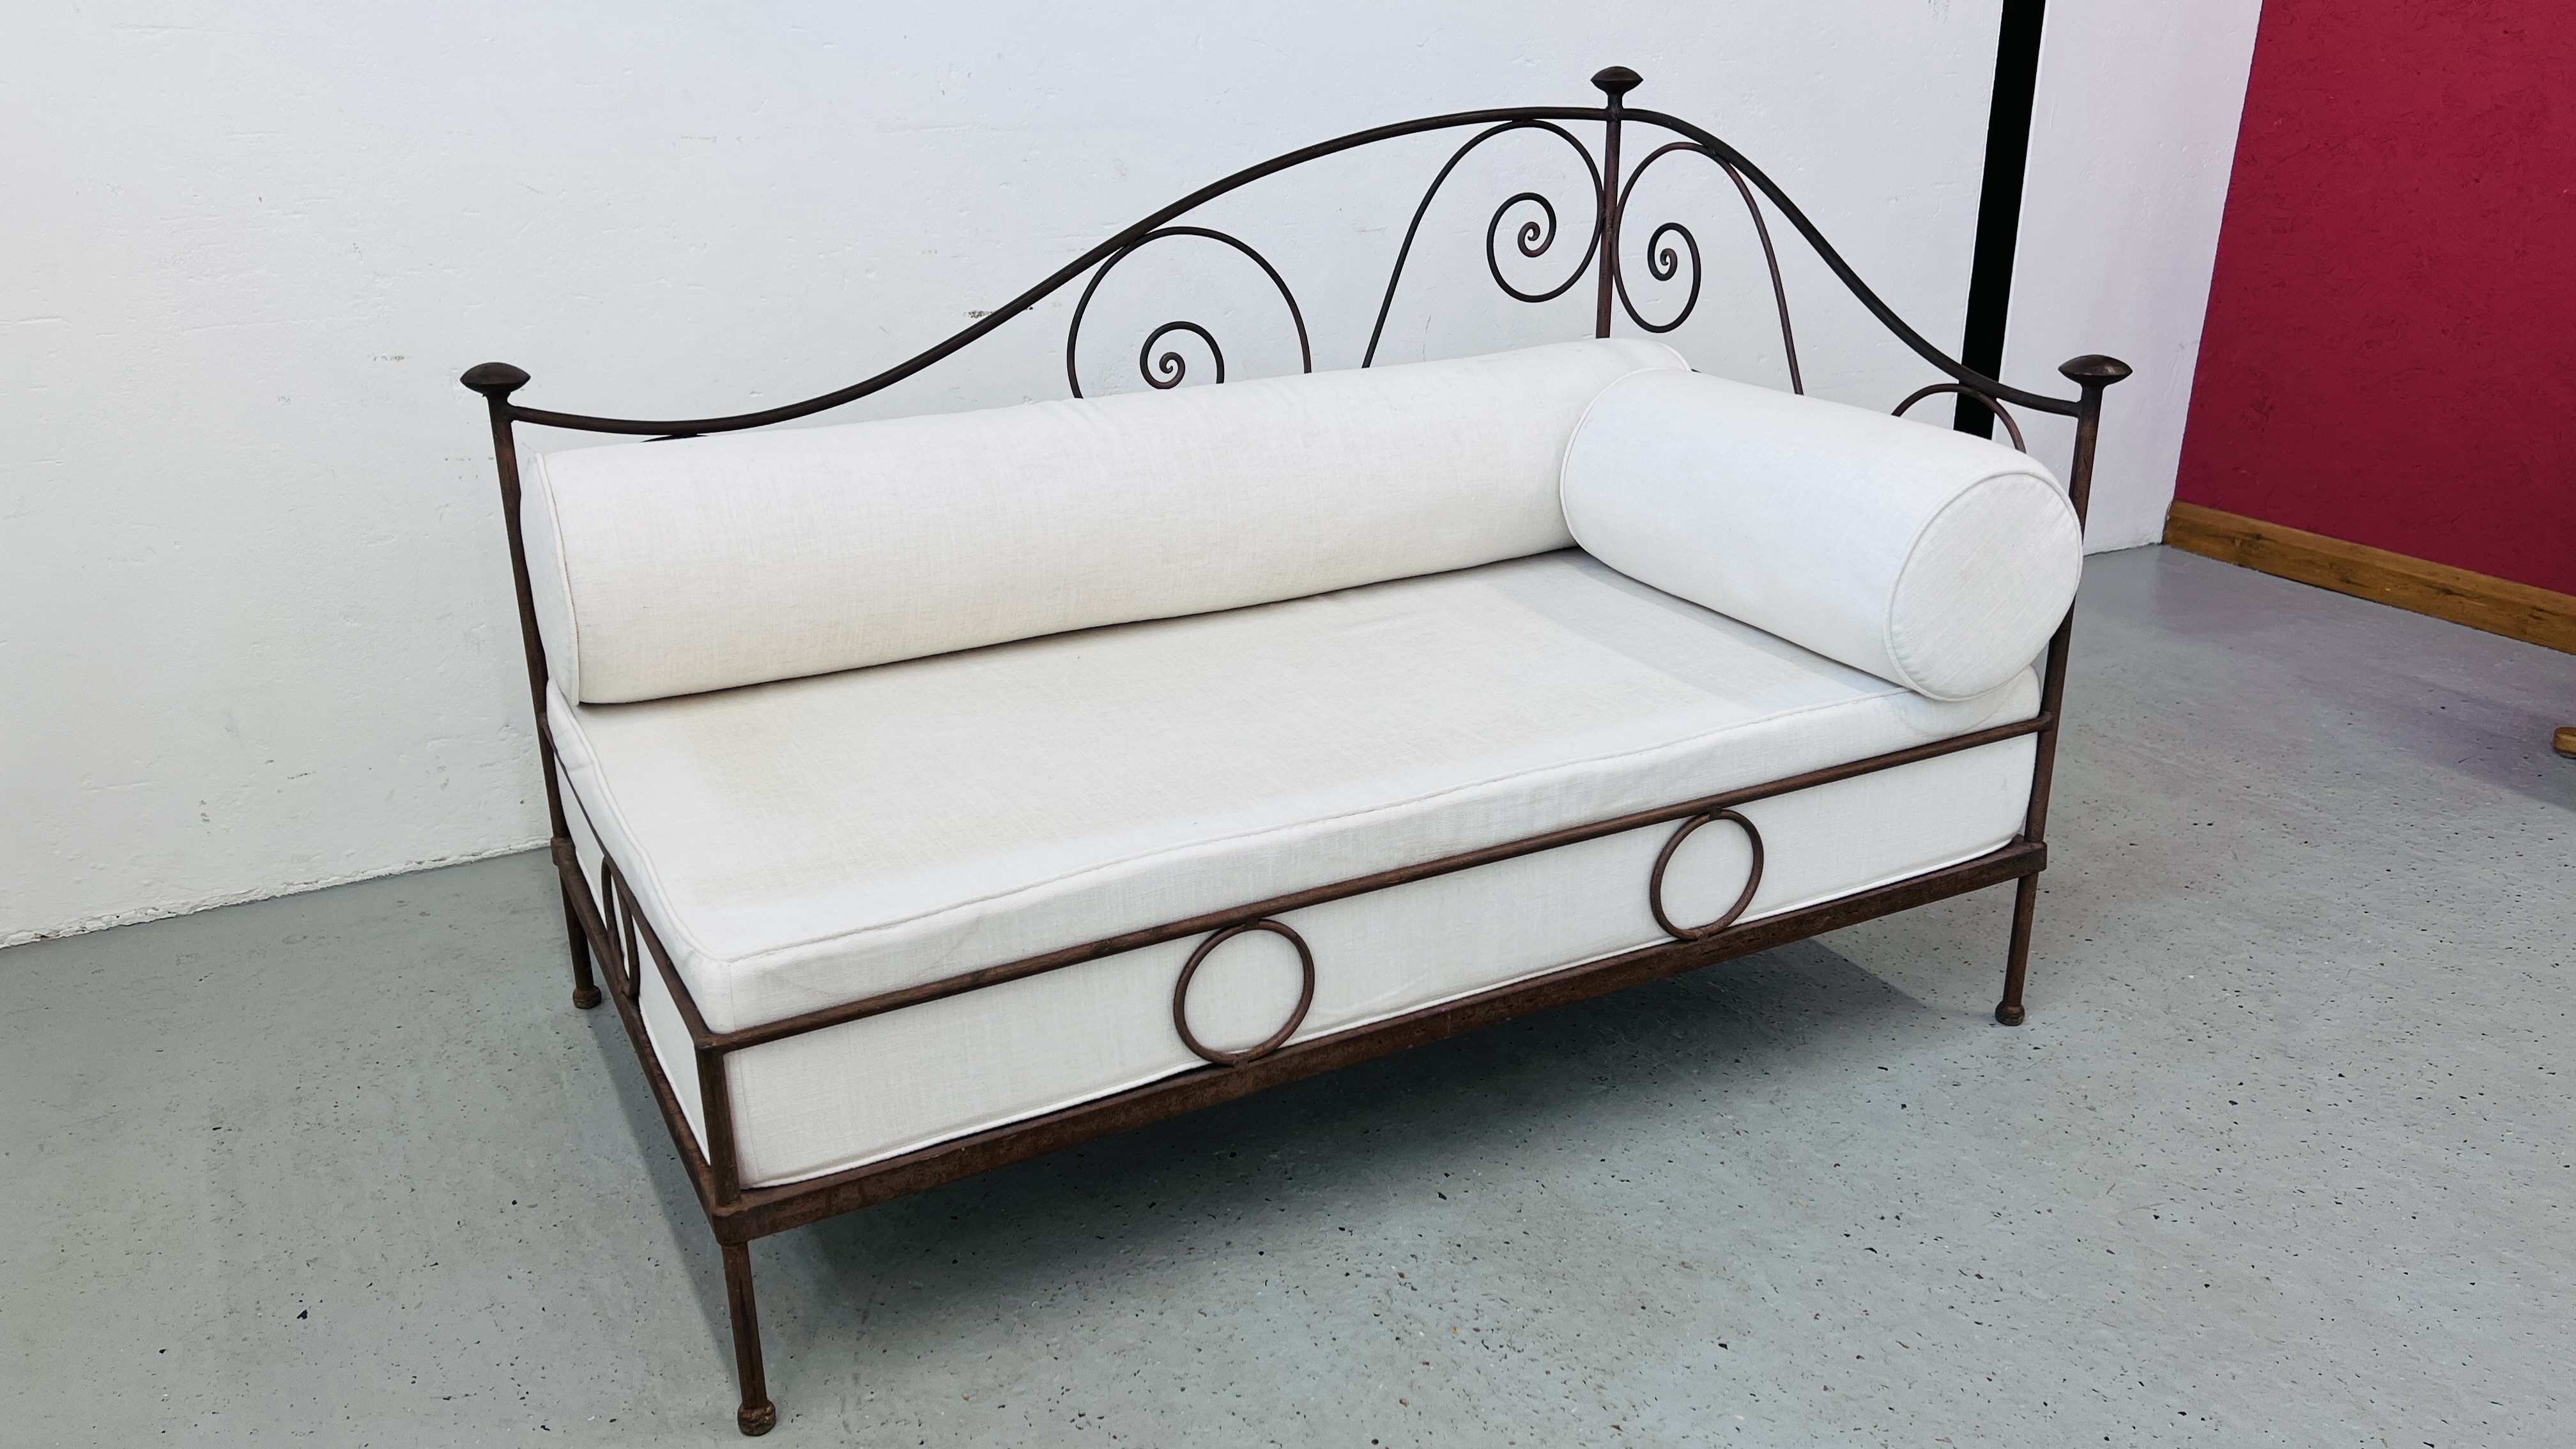 A FRENCH STYLE METALCRAFT CHAISE LOUNGE WITH CREAM UPHOLSTERED BASE AND BOLSTER CUSHIONS LENGTH - Image 3 of 13